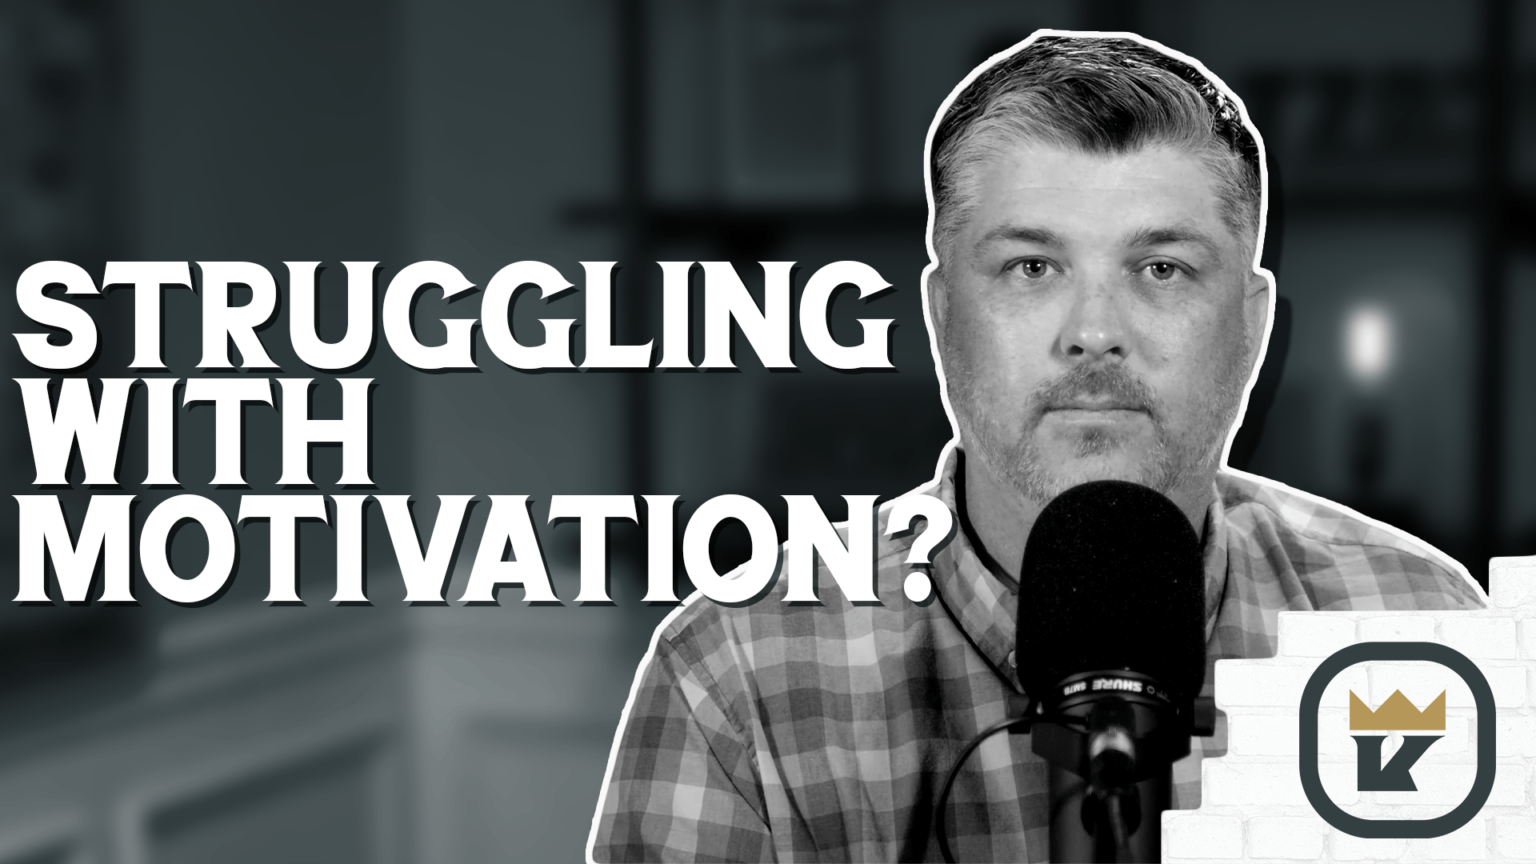 Struggling with Motivation? - Theocast